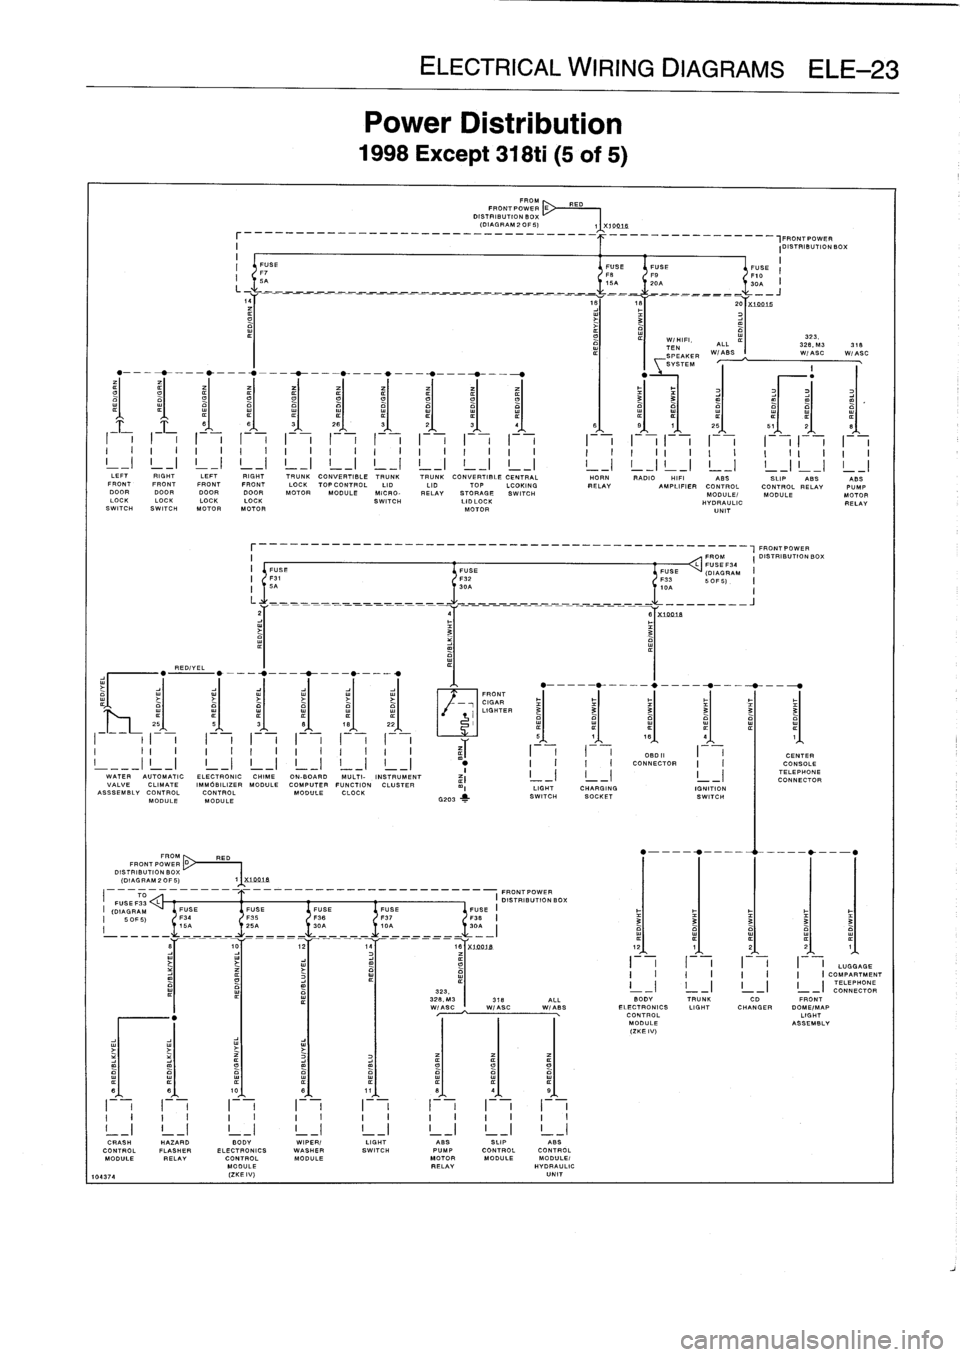 BMW 318i 1998 E36 Workshop Manual 
REDIYEL

FROM
RED
FRONT
PO
WE
R
D~
DISTRIBUTION
BOX
(DIAGRAM
2
OF
5)

_
_
_
_
_
_
_
_
_
_
__
,FRONTPOWER
I

	

IDISTRIBUTIONBOX
I

	

II
FUSE

	

FUSEFUSE

	

FUSE
F7

	

FS

	

FO

	

F10
I
I
5A

	
